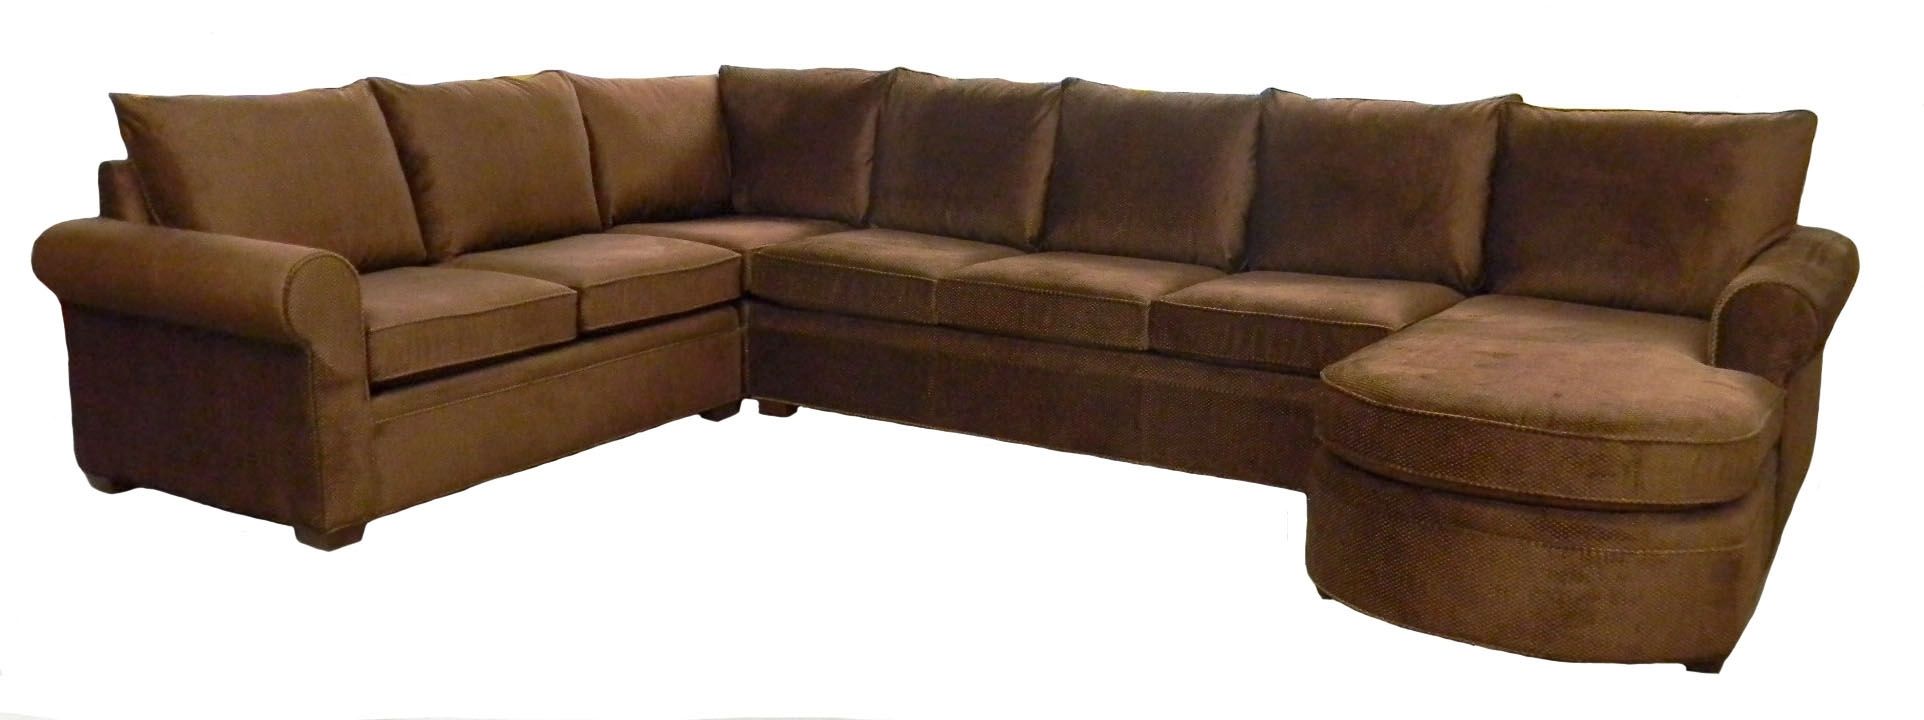 Examples Custom Sectional Sofas Carolina Chair Furniture With Customizable Sectional Sofas (View 8 of 10)